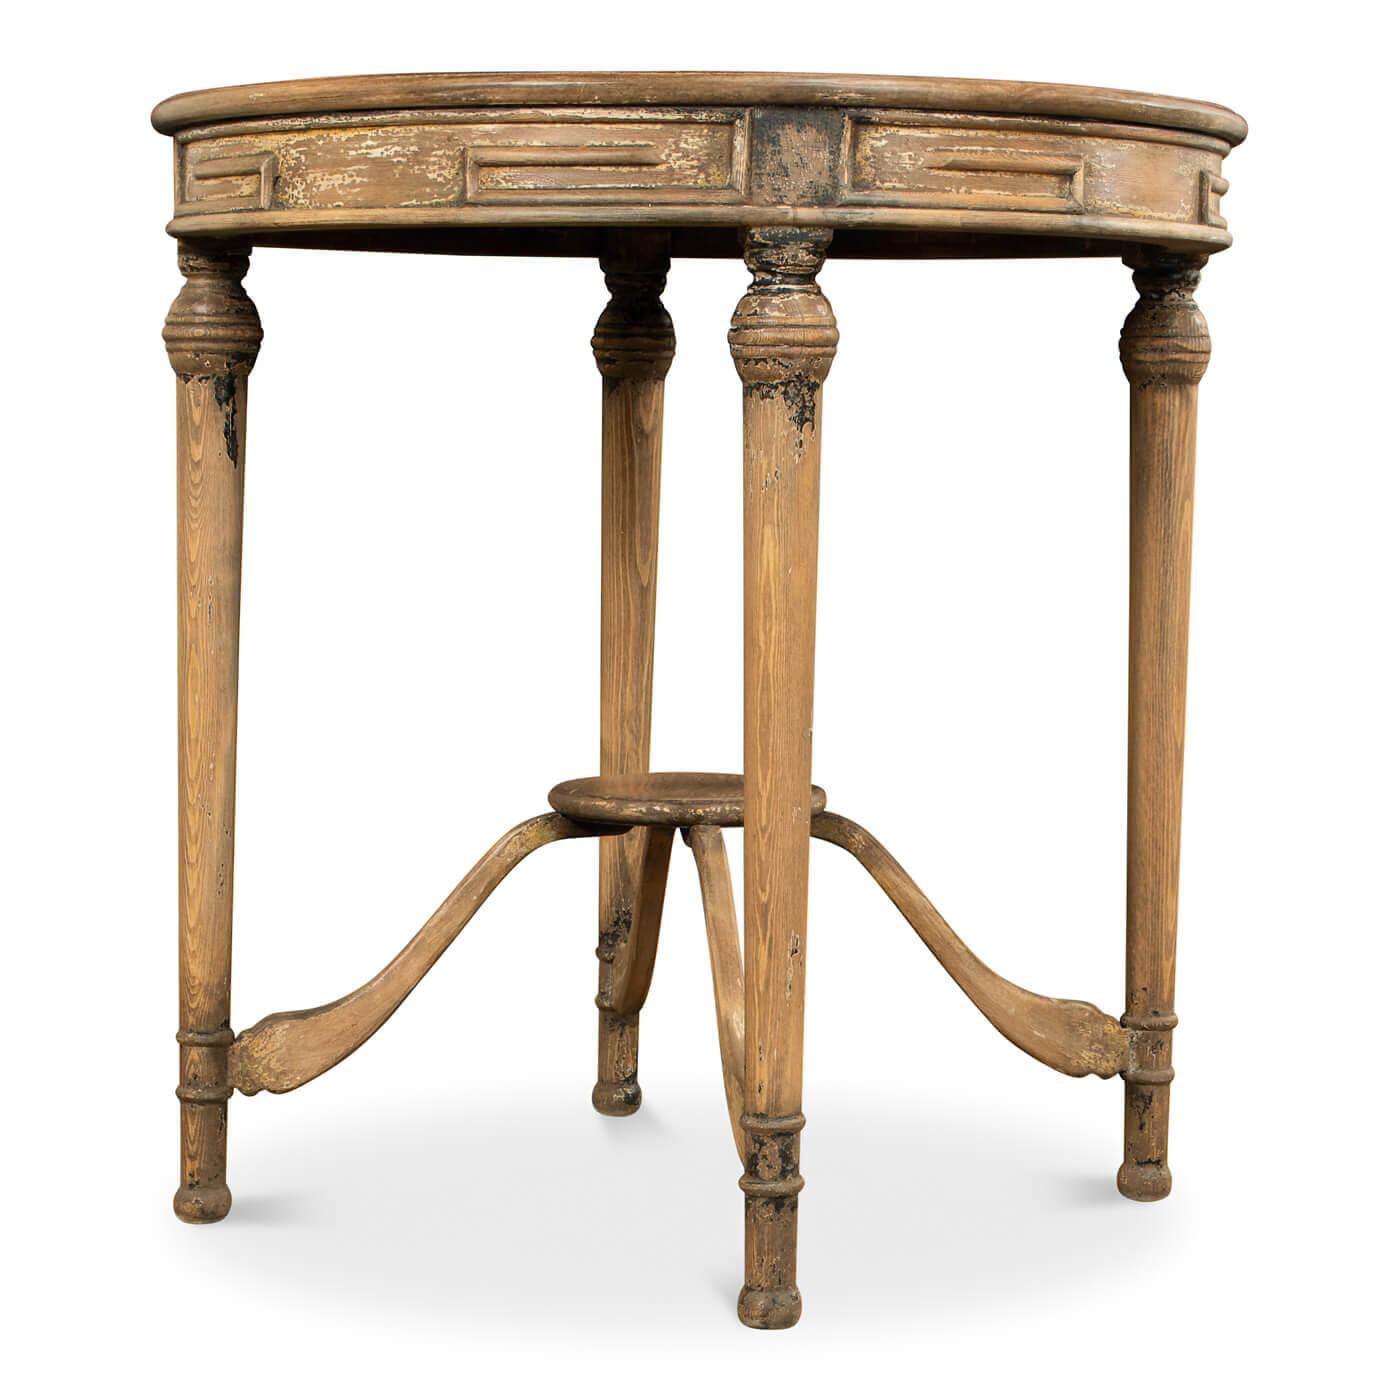 Contemporary French Country-Style Tea Table For Sale